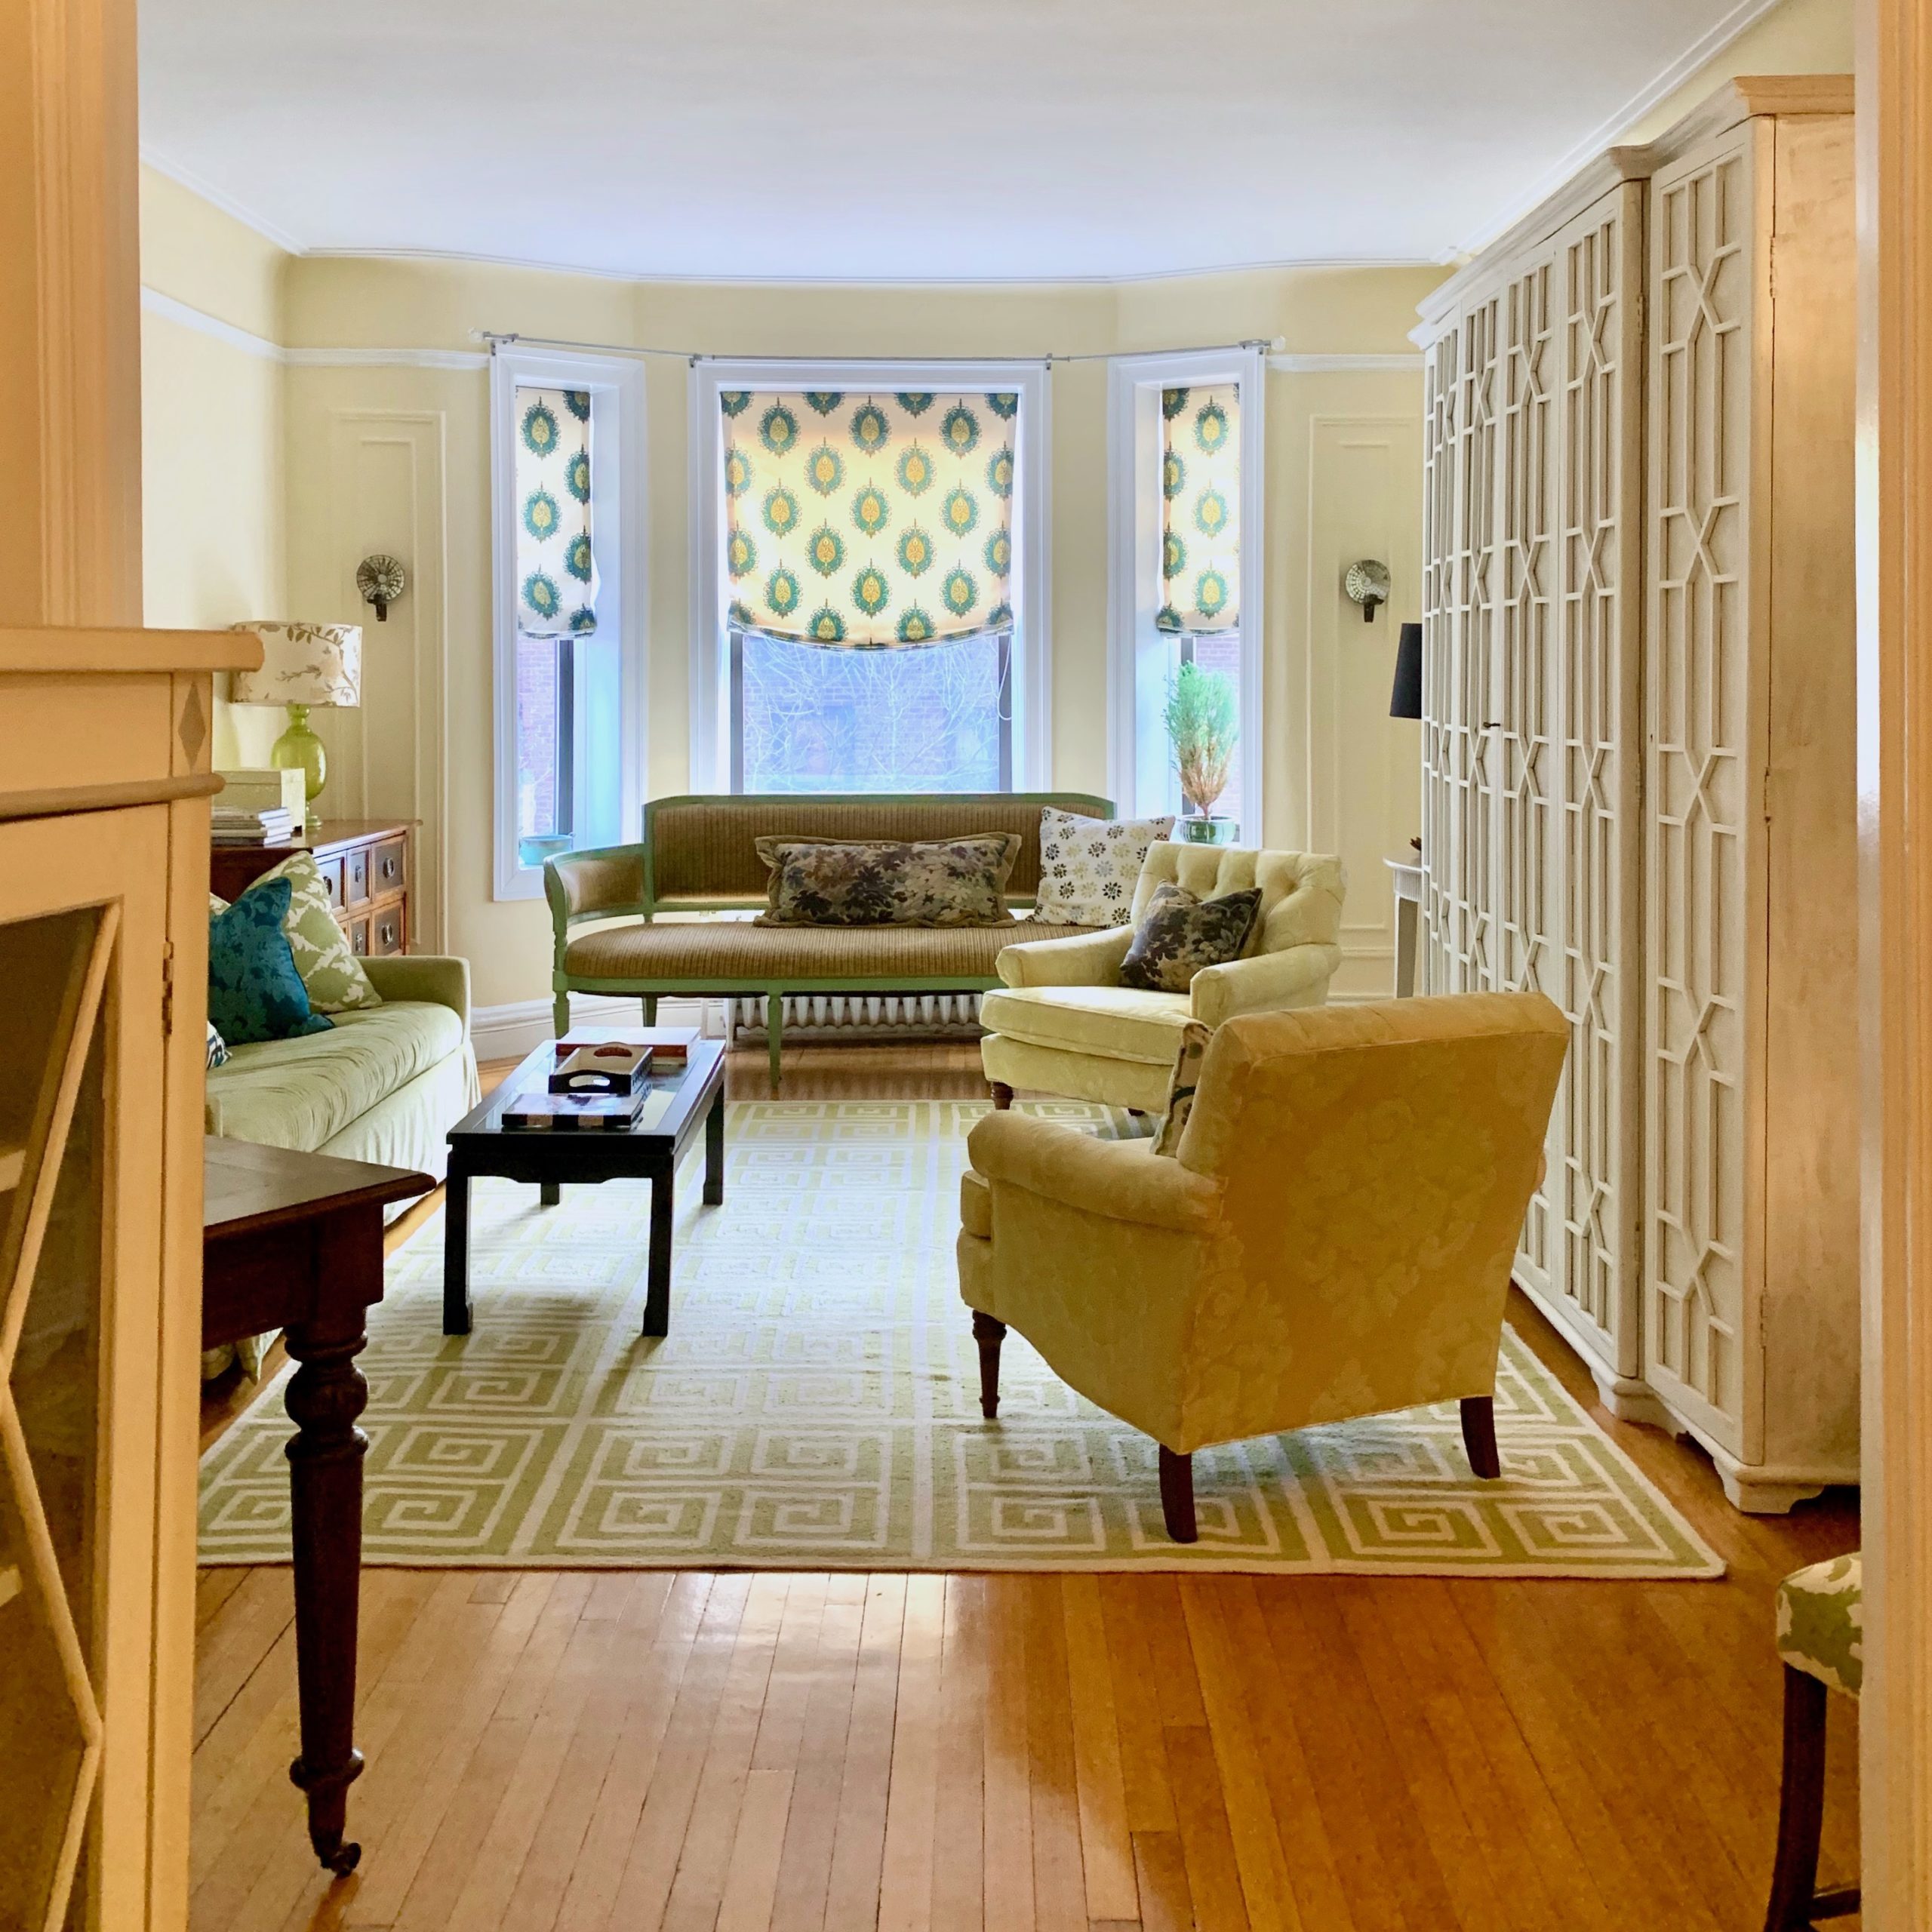 Pondfield Rd W - Bronxville apartment for sale - entry-living room - Benjamin Moore America's Heartland wall color